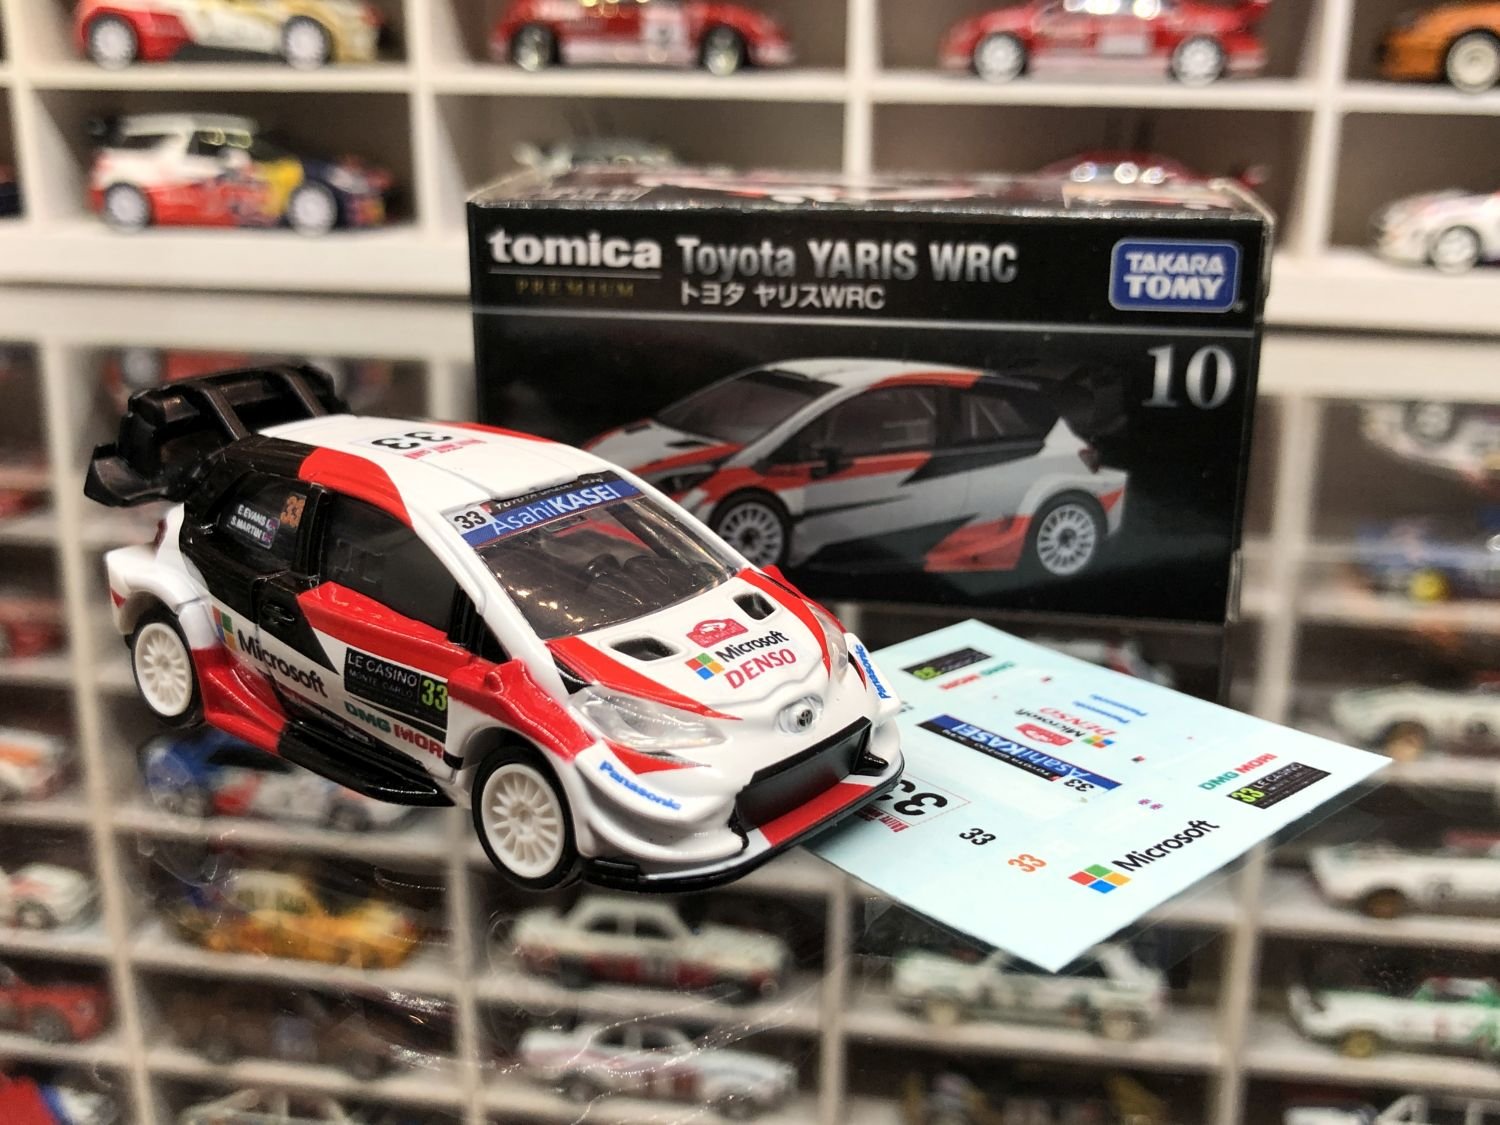 DECALS! Toyota Yaris WRC for Tomica 